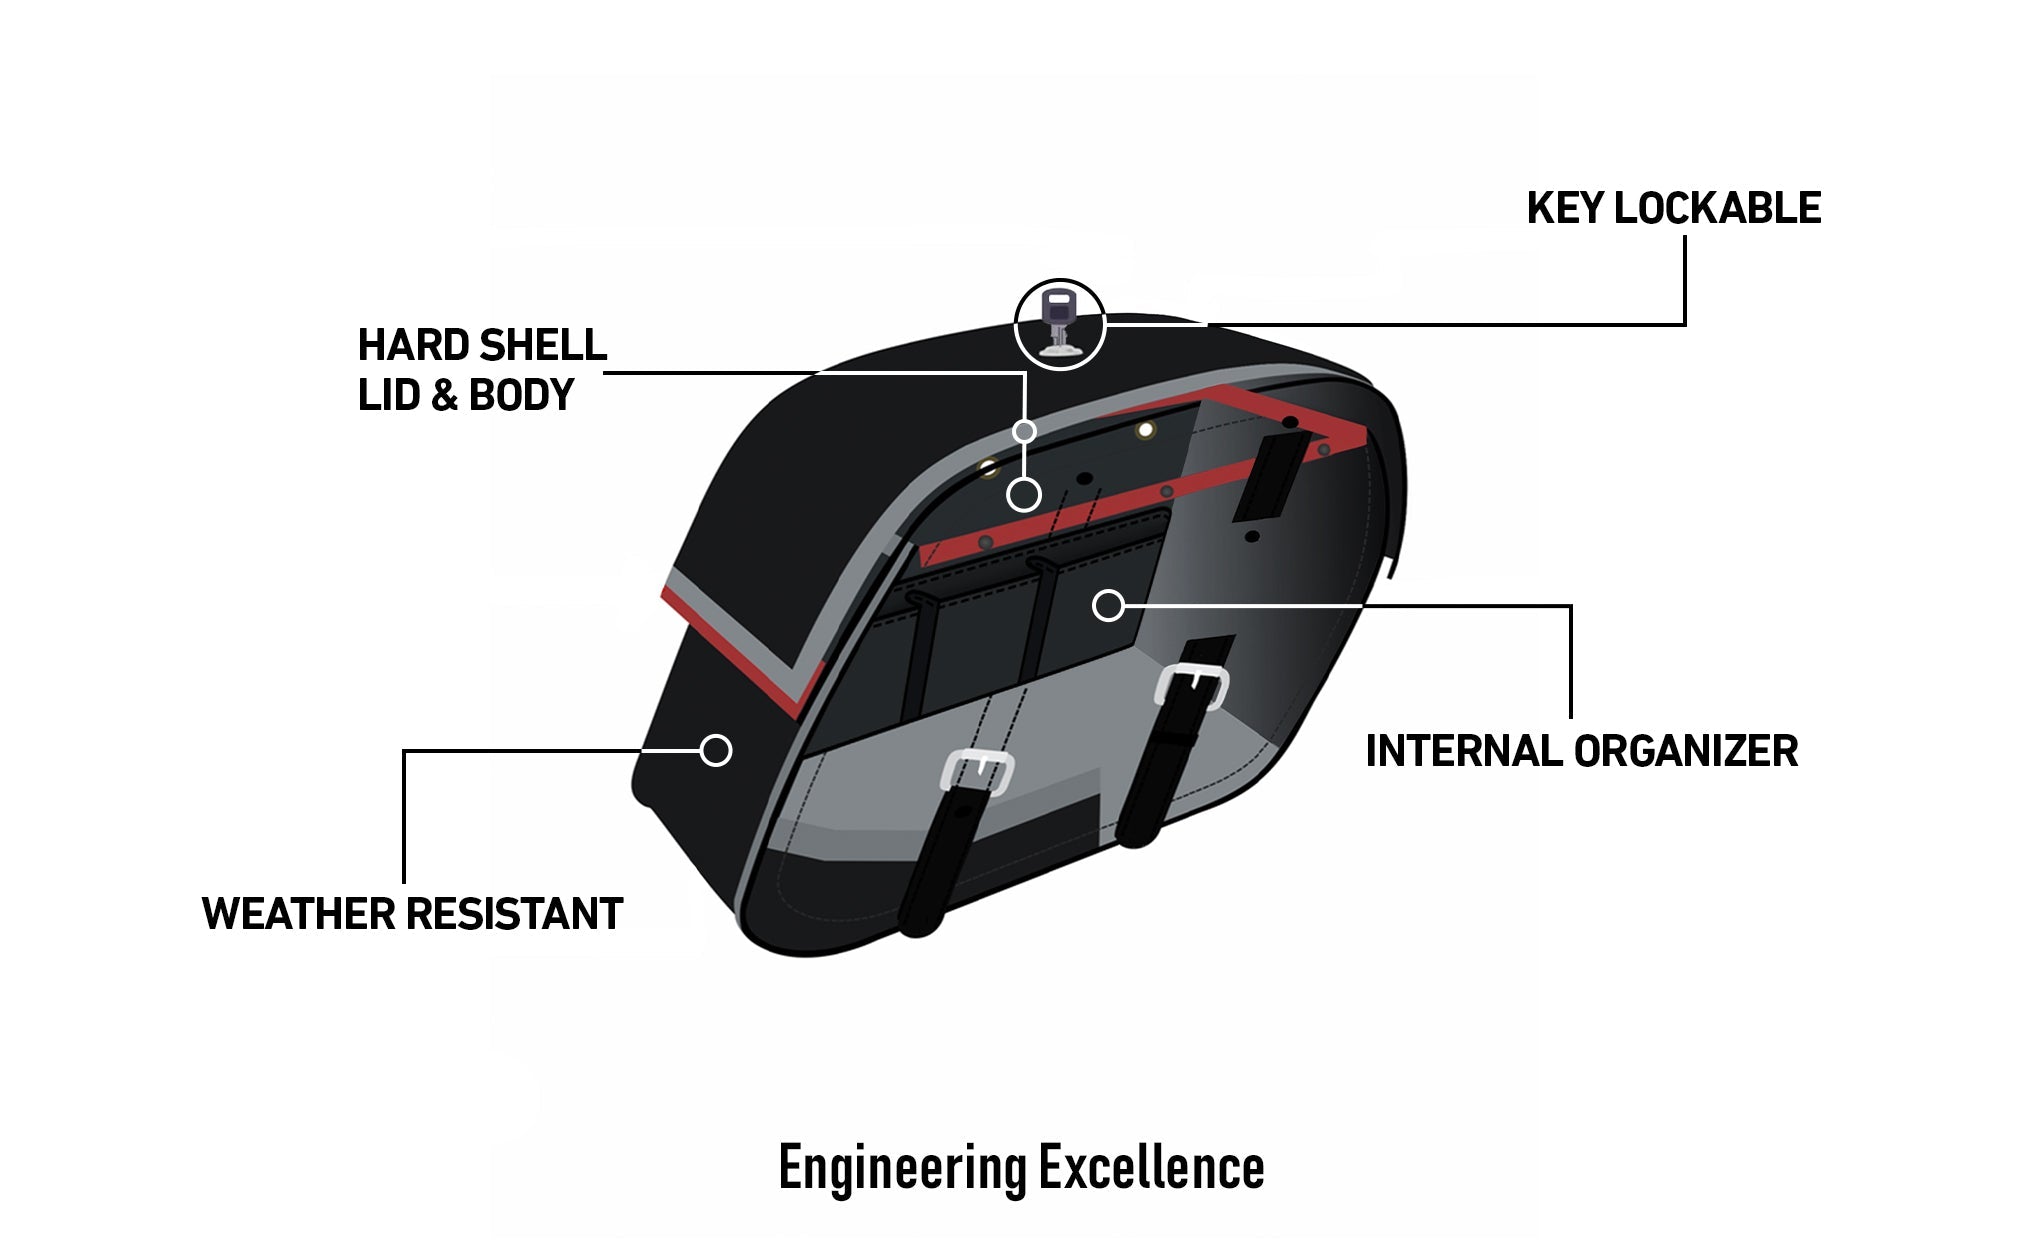 Viking Raven Large Motorcycle Leather Saddlebags For Harley Softail Slim Engineering Excellence with Bag on Bike @expand